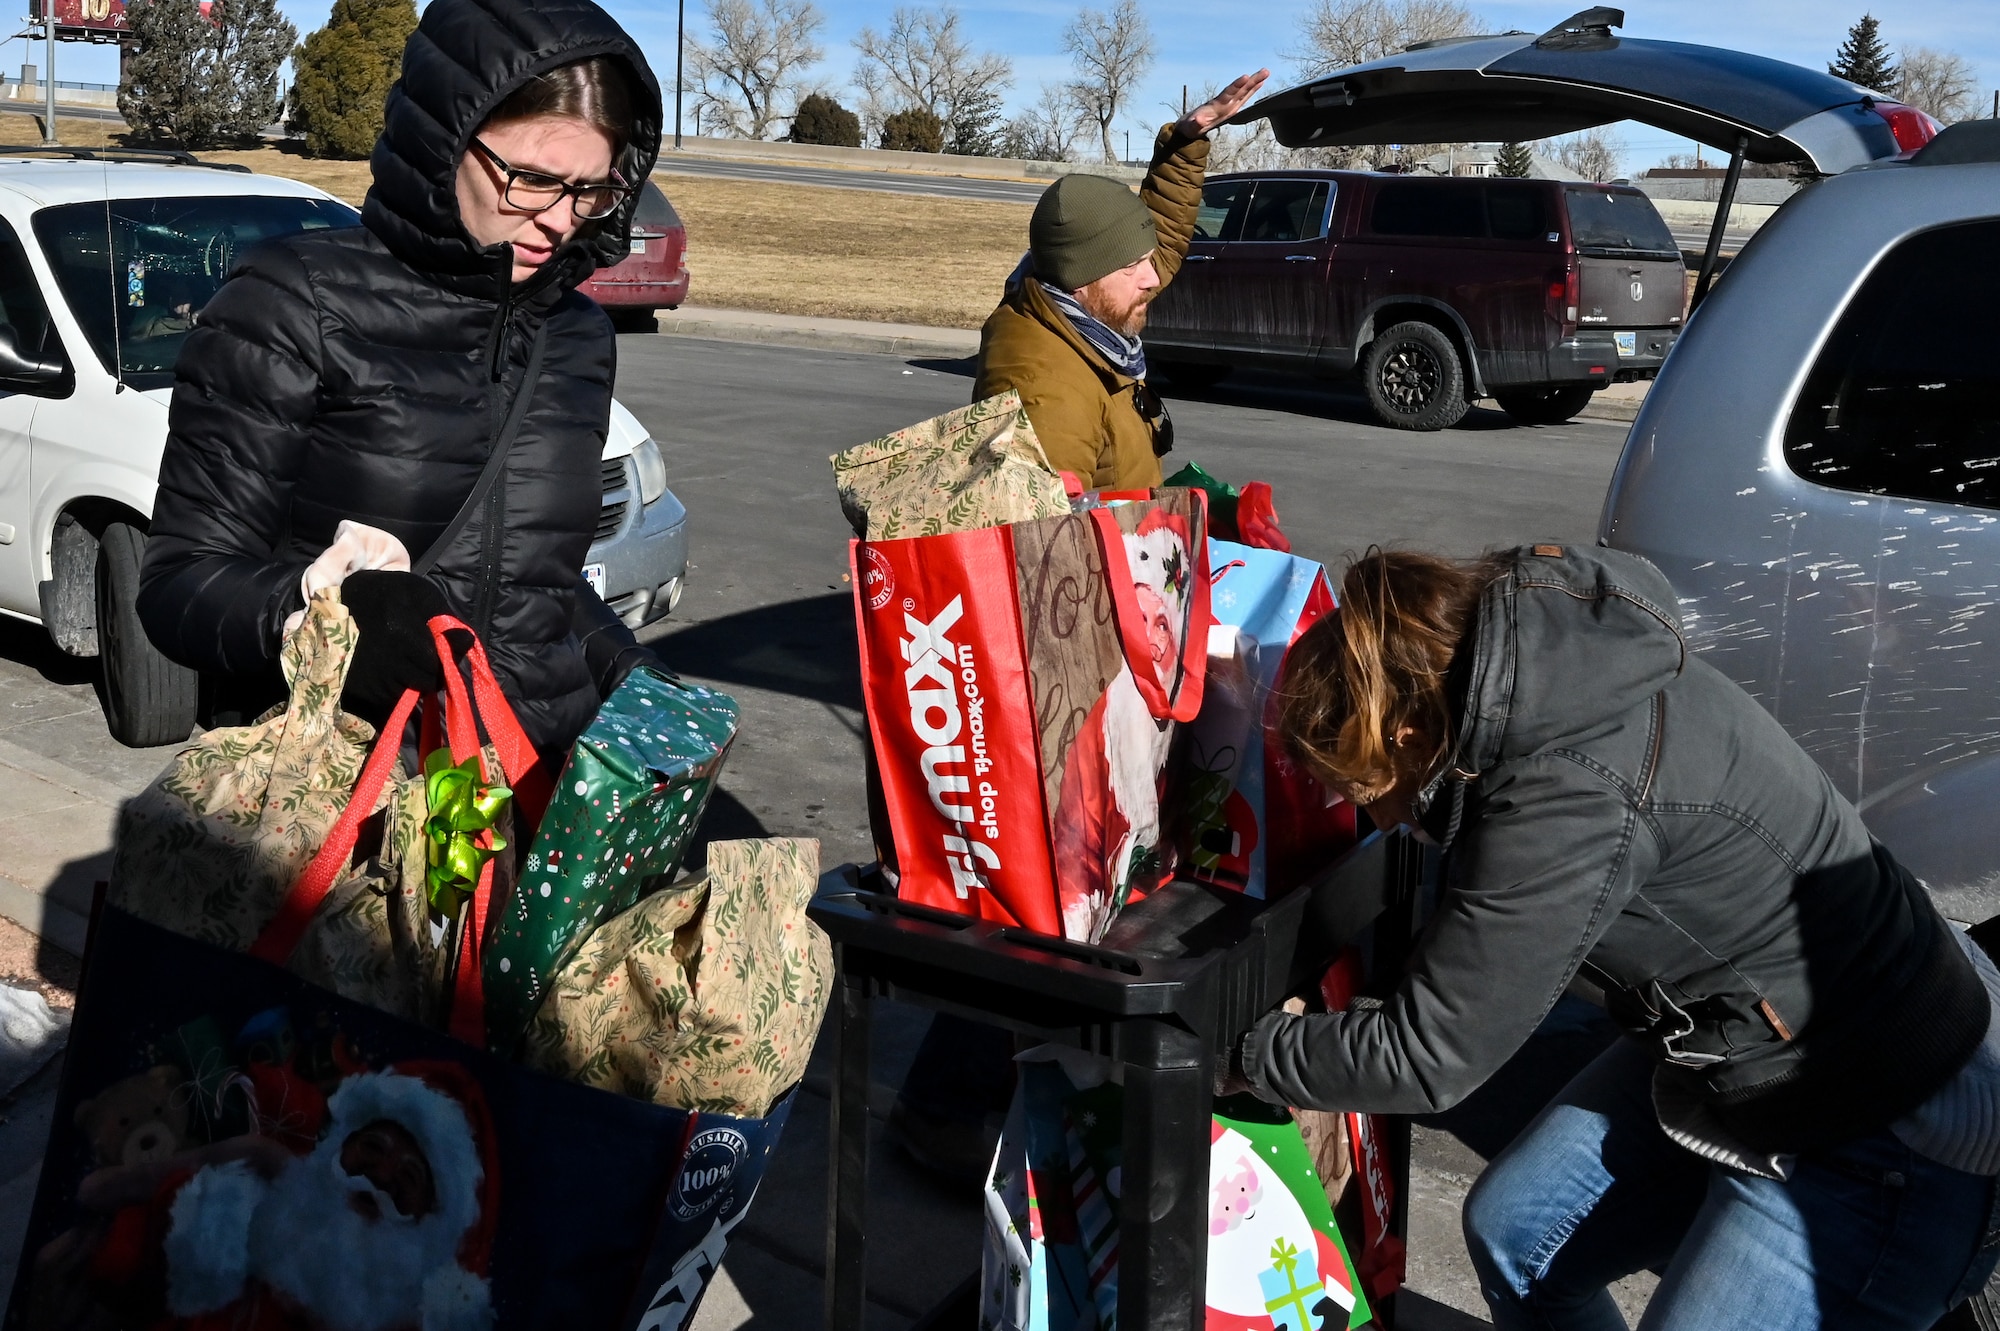 Senior Airman Kyra Blystone, 90 CONS contracting officer, puts presents on a cart to drop them off for local families in need as part of Needs Inc.’s Adopt a Family Program in Cheyenne, Wyoming, Dec 19, 2022. 90 CONS came together for the second consecutive year to support two families in need, so they did not have to choose between giving their kids food or celebrating the holiday season. (U.S. Air Force photo by Joseph Coslett Jr.)